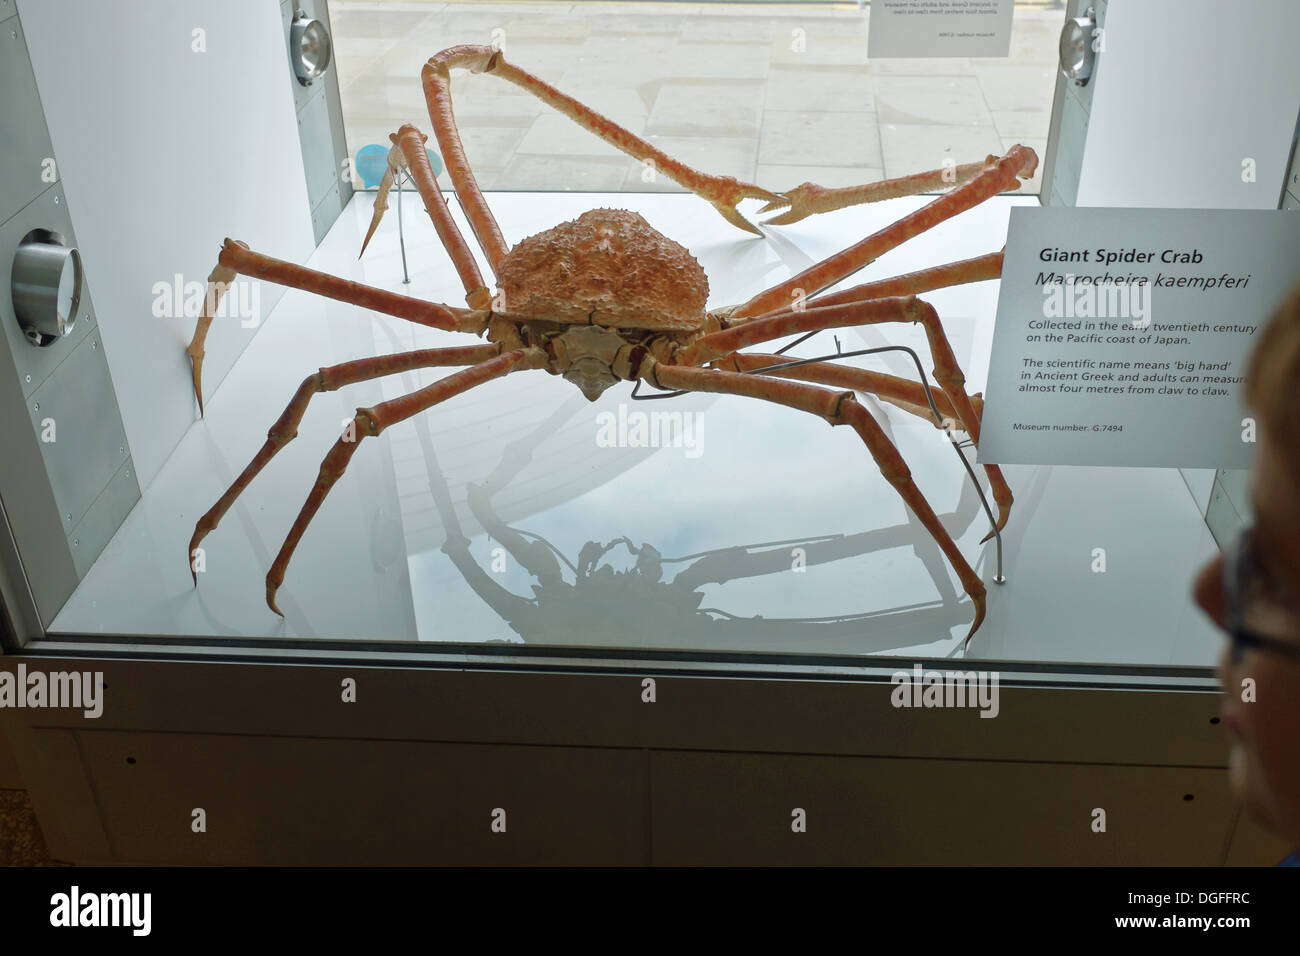 Giant spider crab on display in Manchester Museum, UK Stock Photo